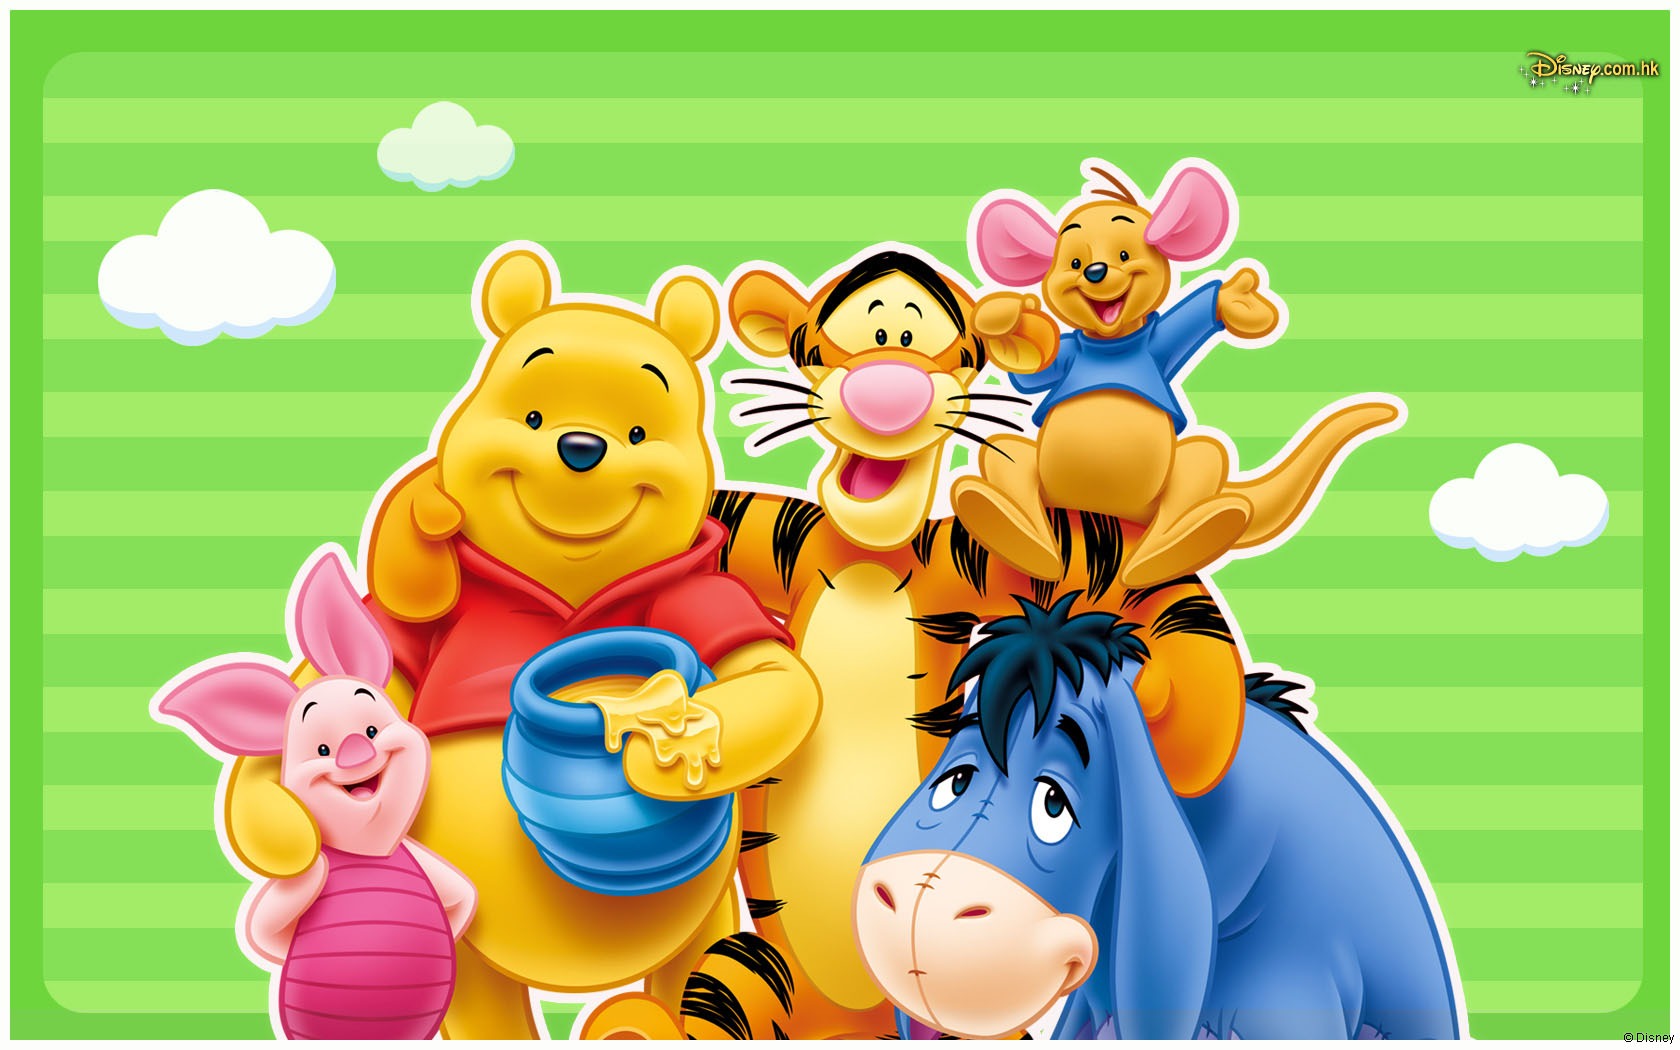  orgHD winnie the pooh computer wallpaper Nupe HD Wallpapers 1680x1050